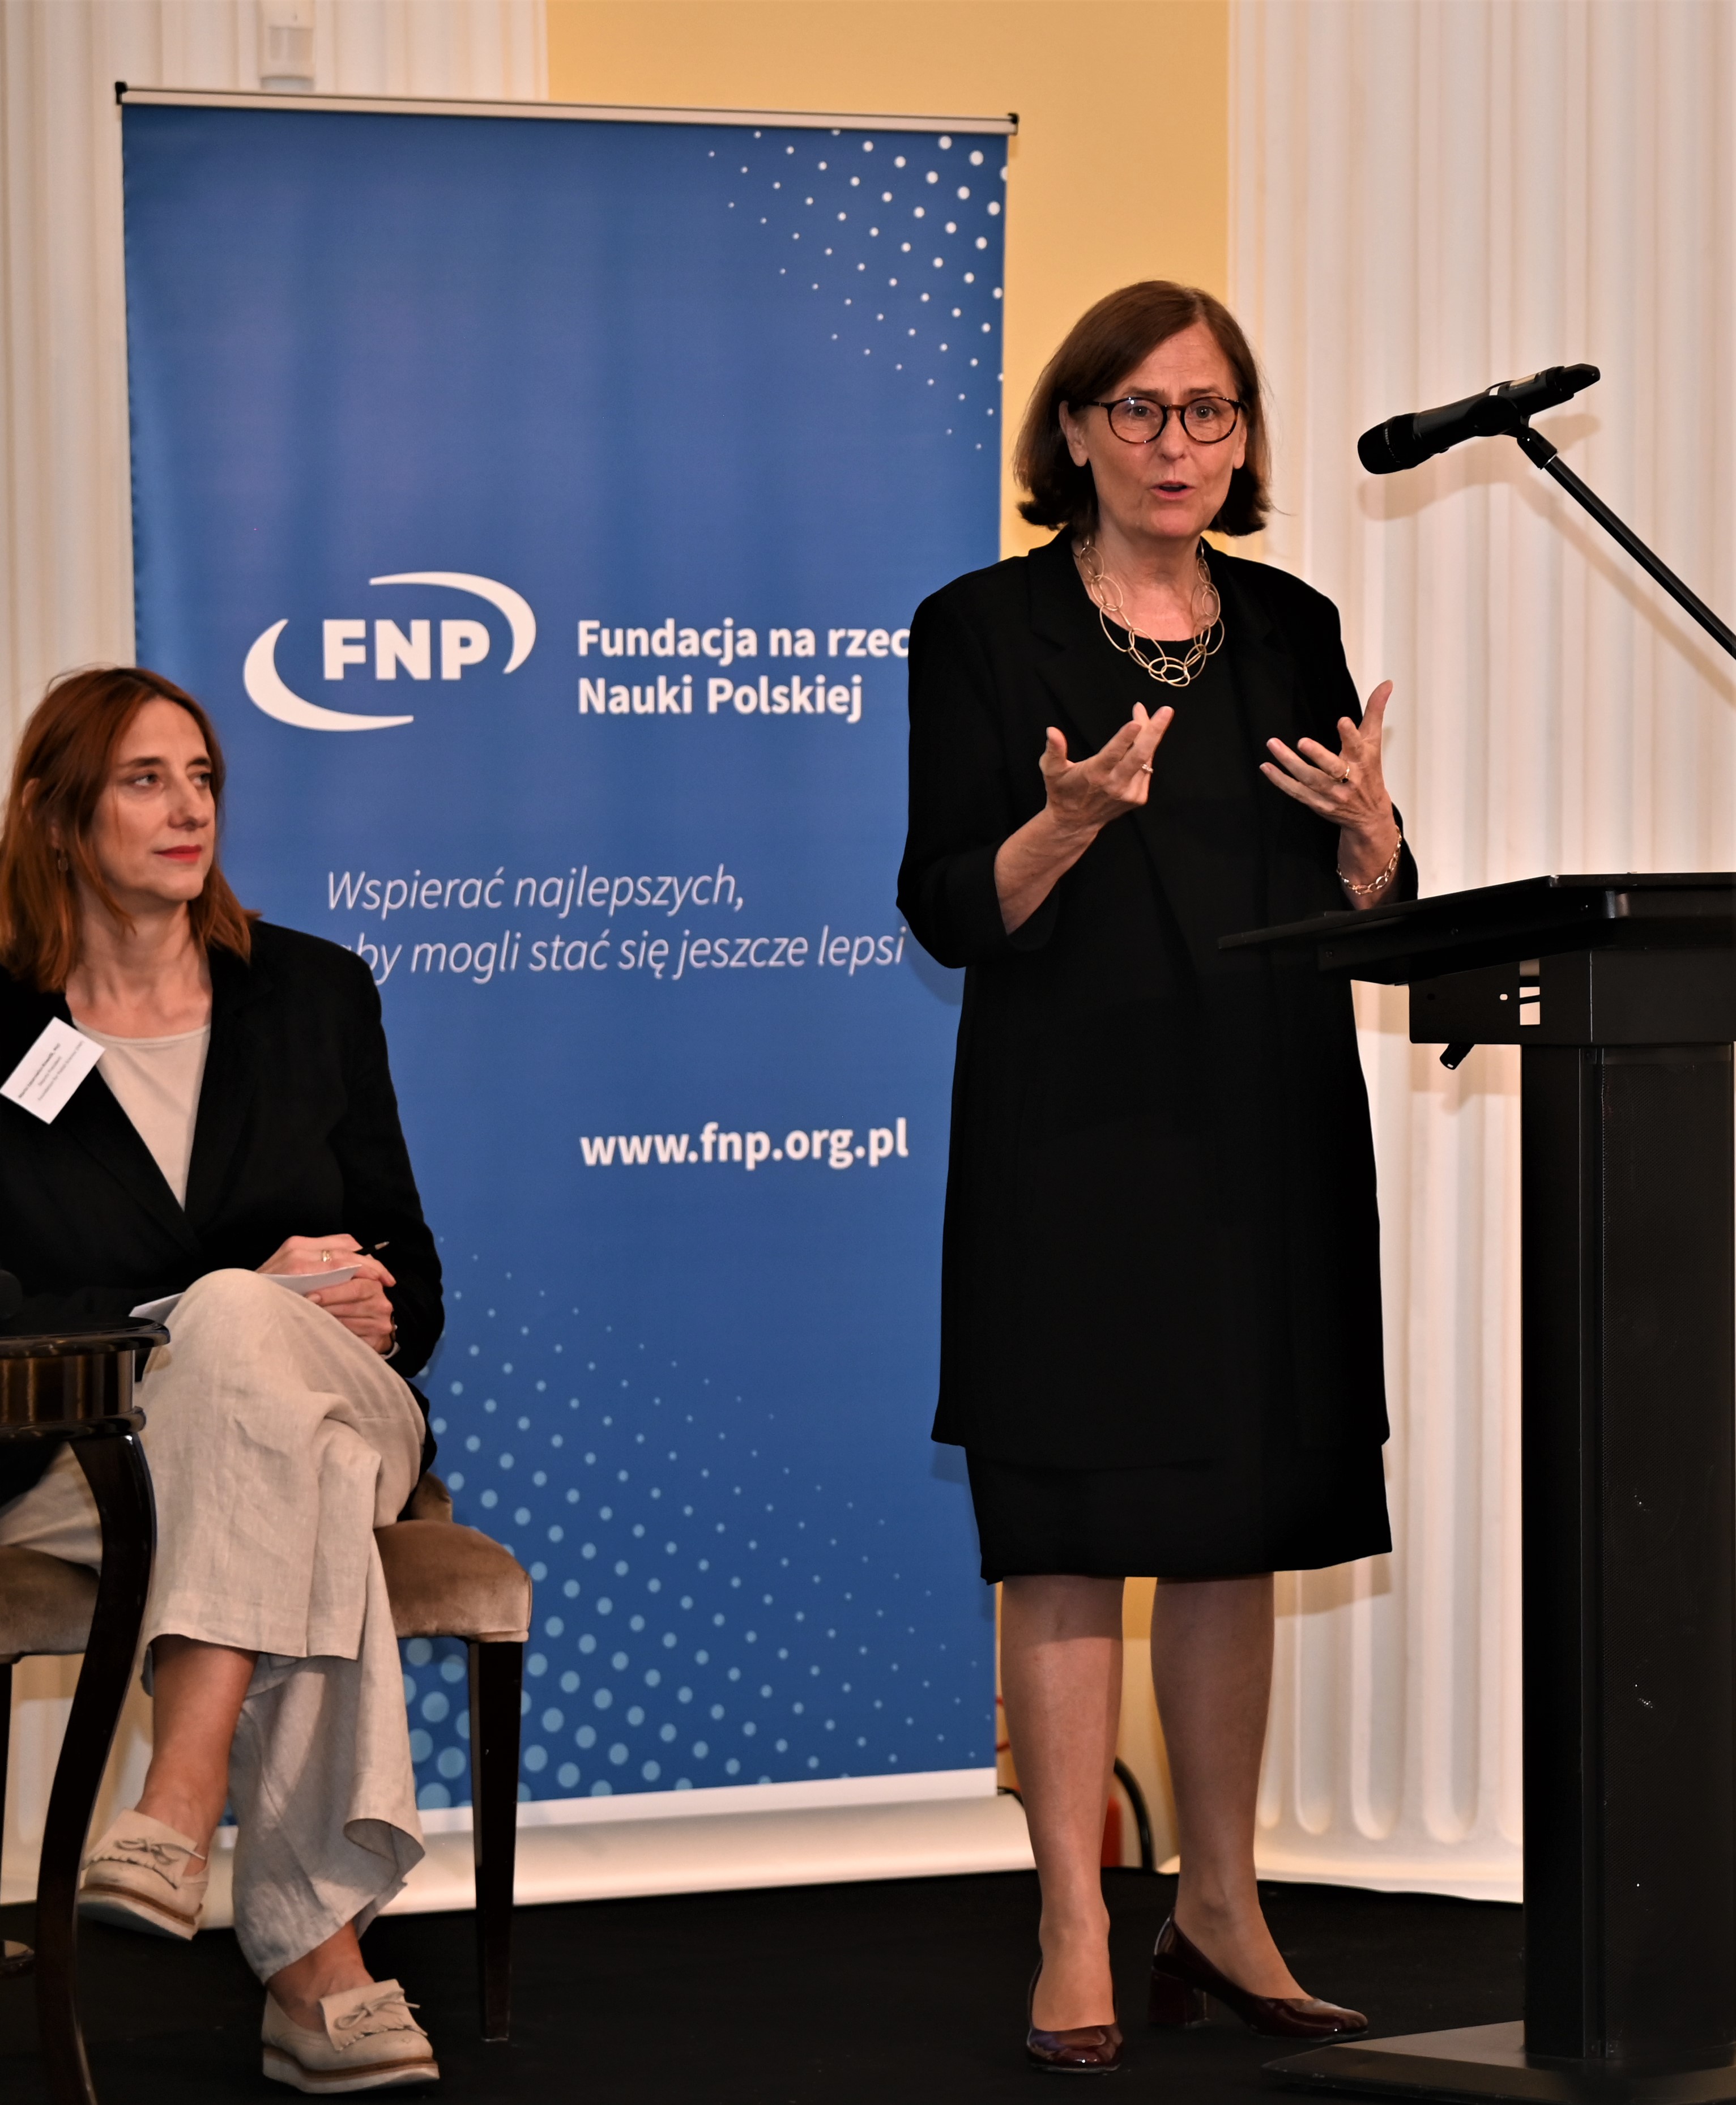 Impressions of the Fourth Polish-German Science Meeting: Introductory statement by DFG President Professor Katja Becker to the panel discussion.